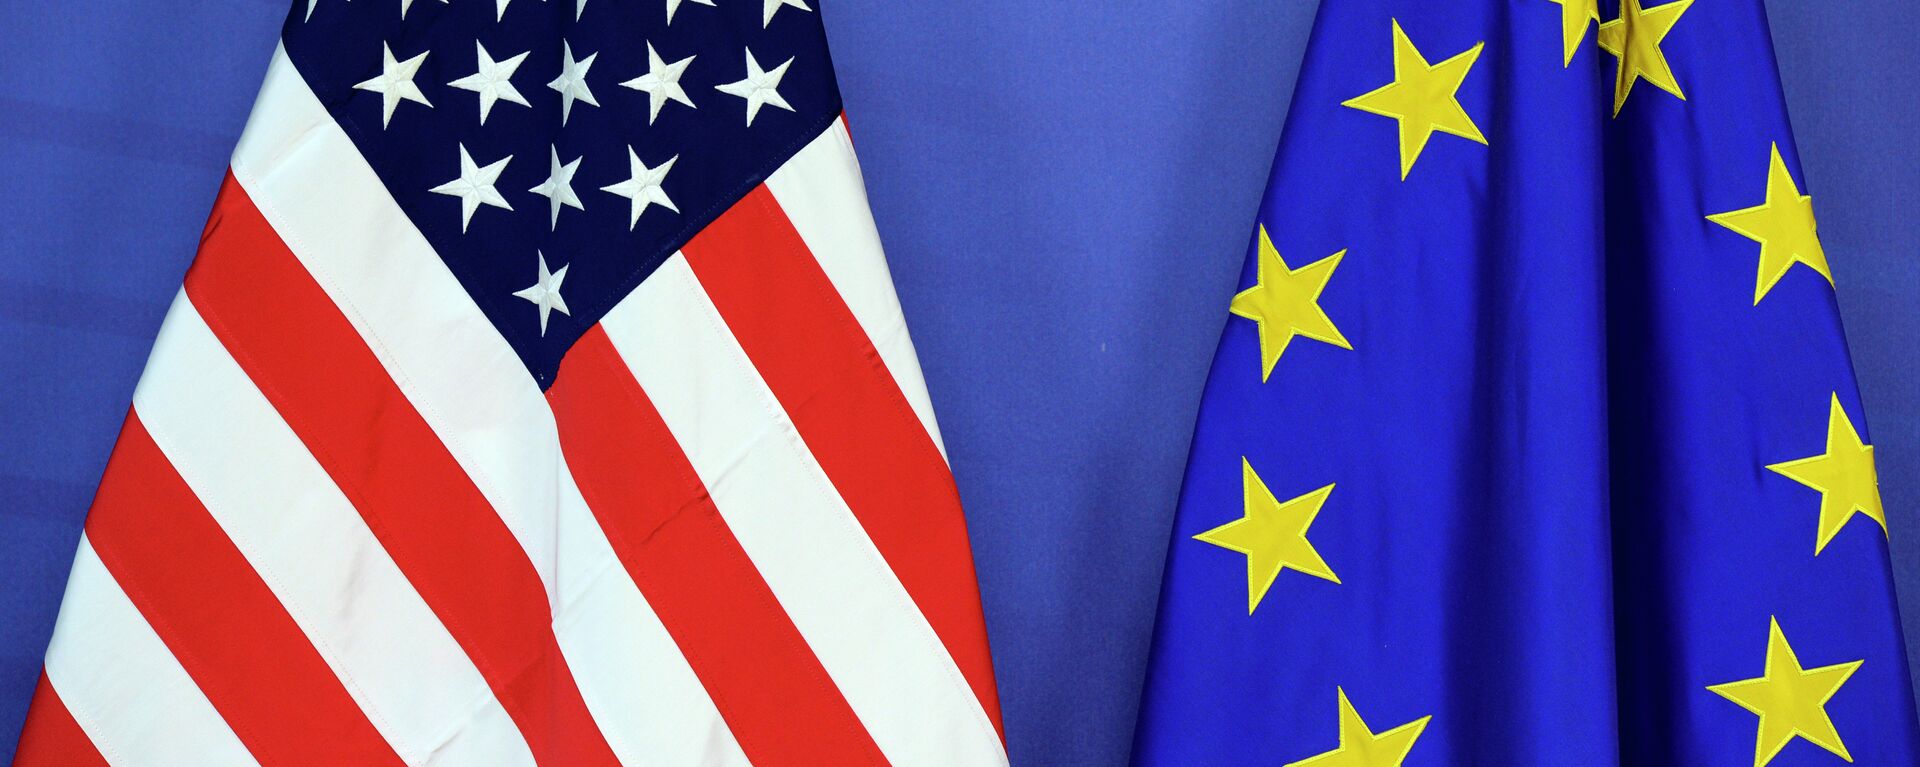 The US national flag (L) and the flag of the European Union are placed side-by-side during the Transatlantic Trade and Investment Partnership (TTIP) meeting at the European Union Commission headquarter in Brussels, on July 13, 2015 - Sputnik Mundo, 1920, 25.03.2022